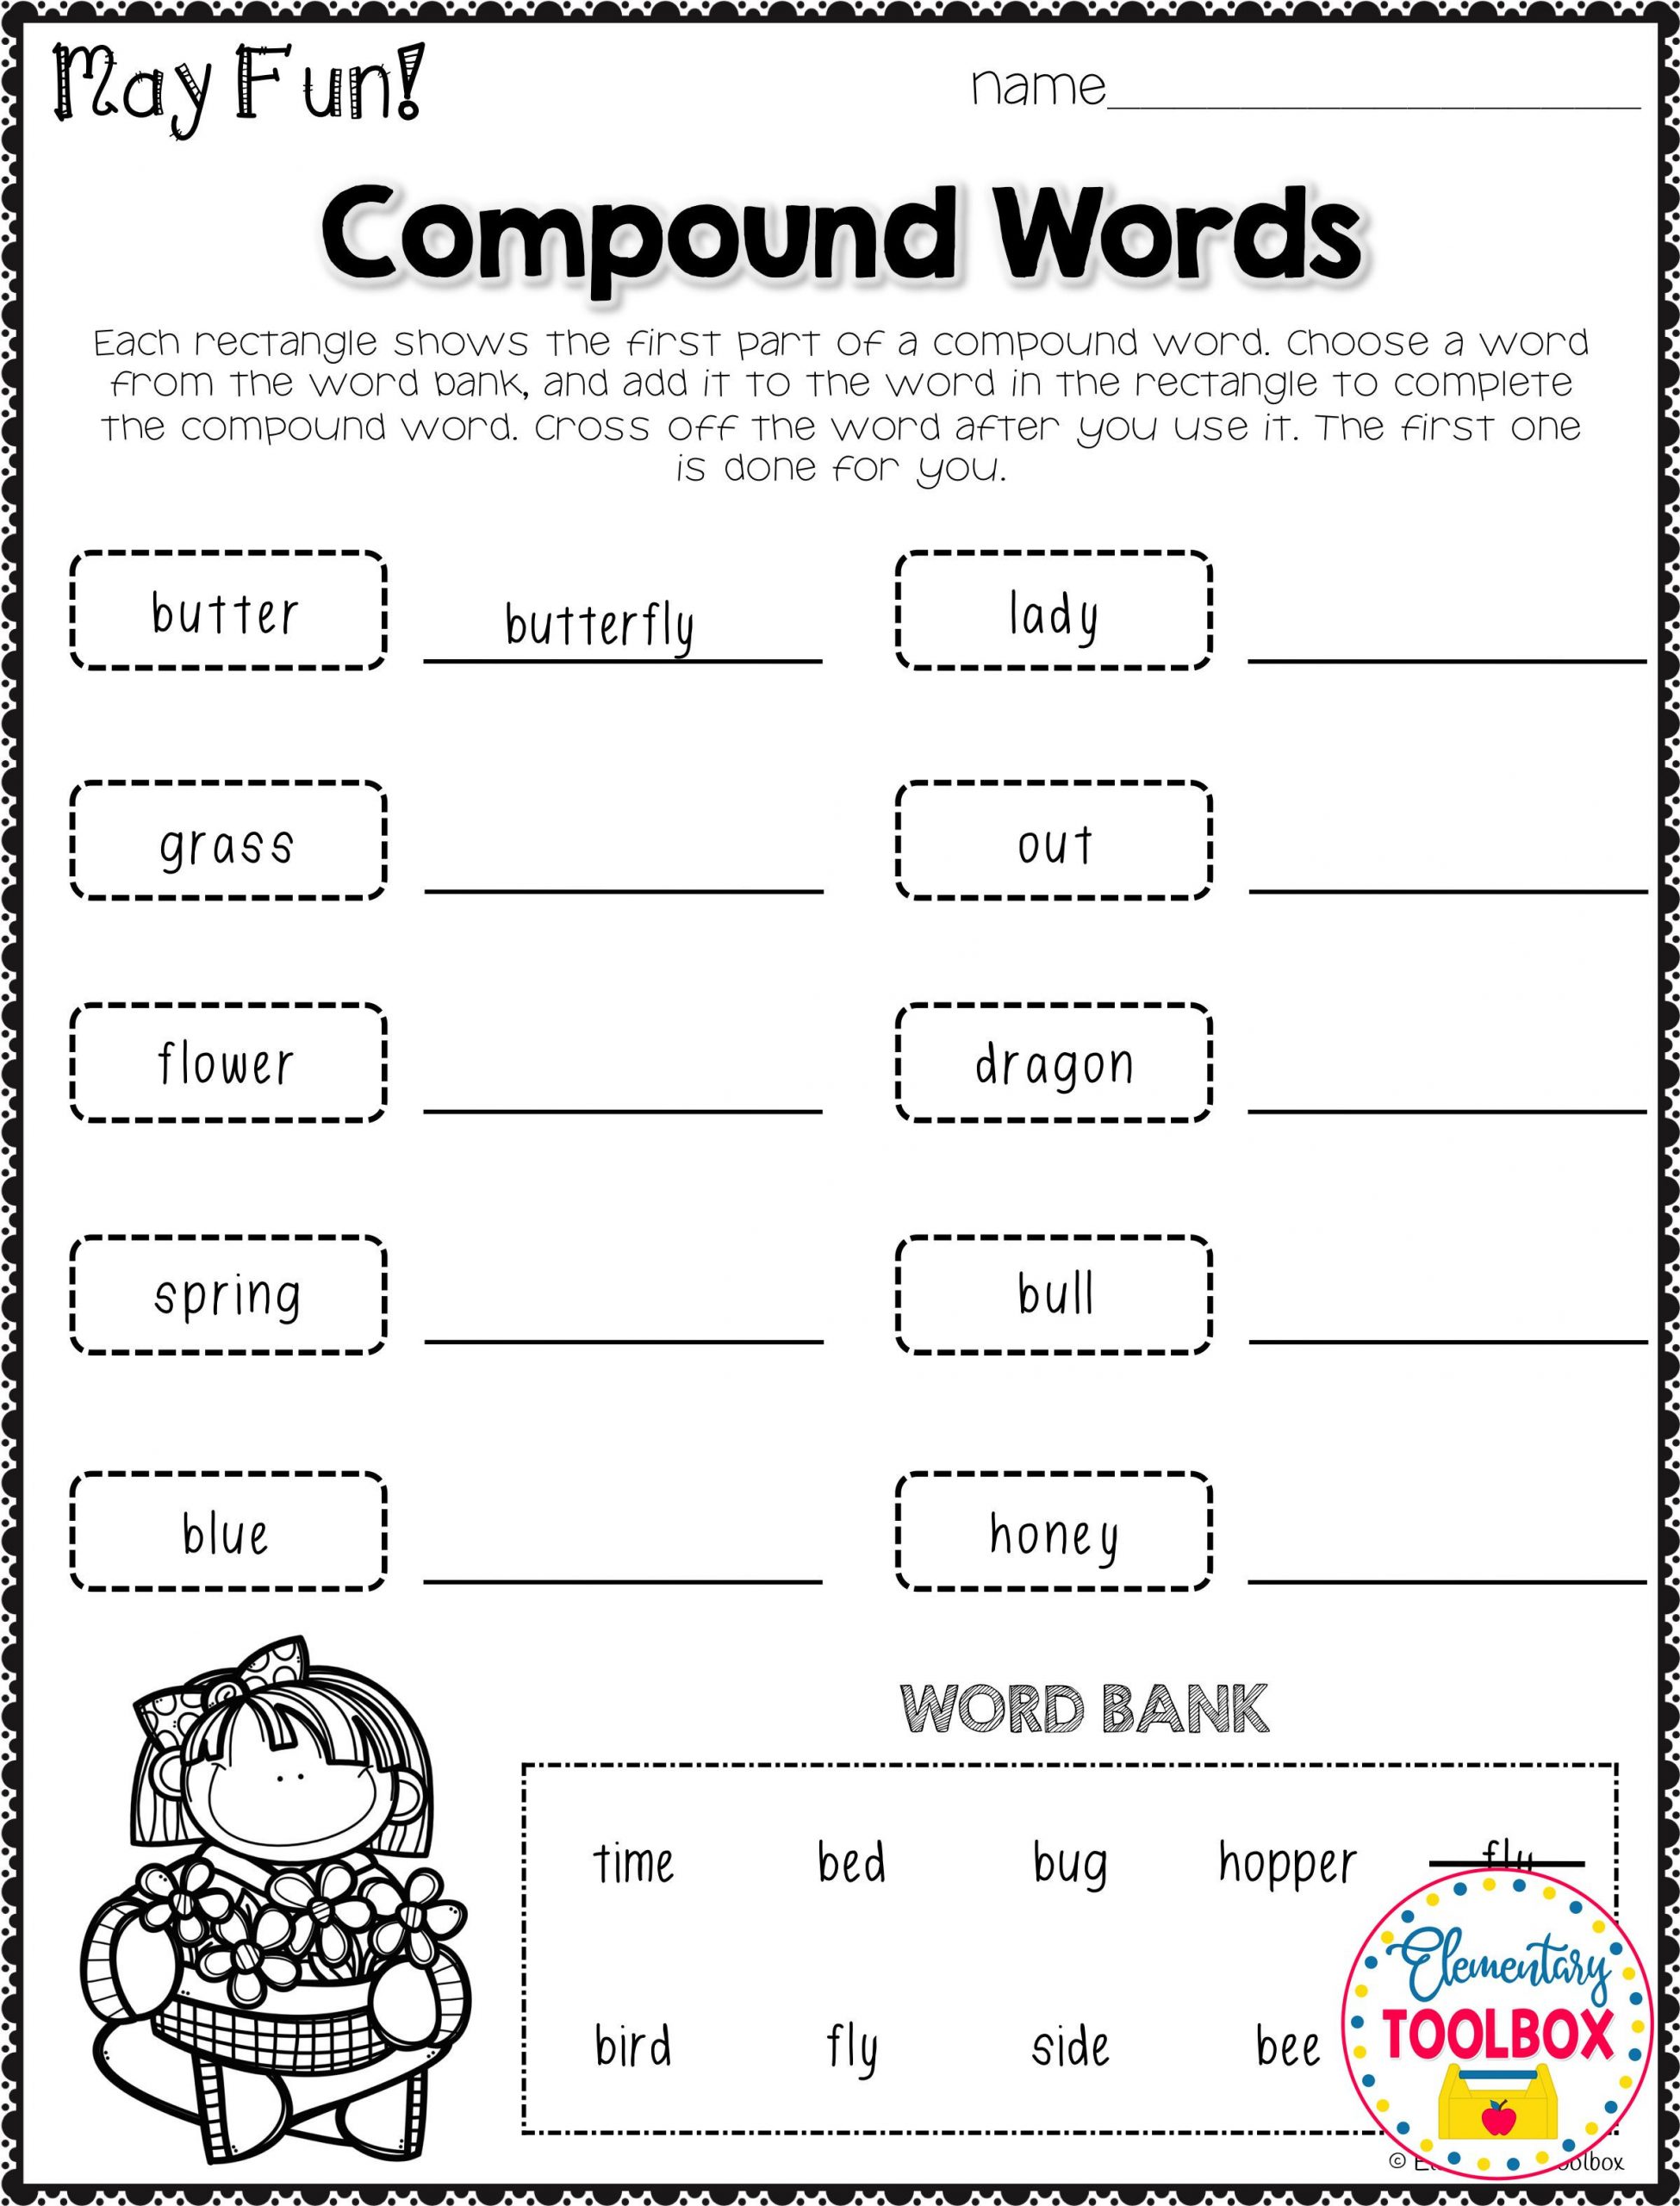 6th Grade Spelling Worksheet these No Prep Grammar Printables are Great for Practicing